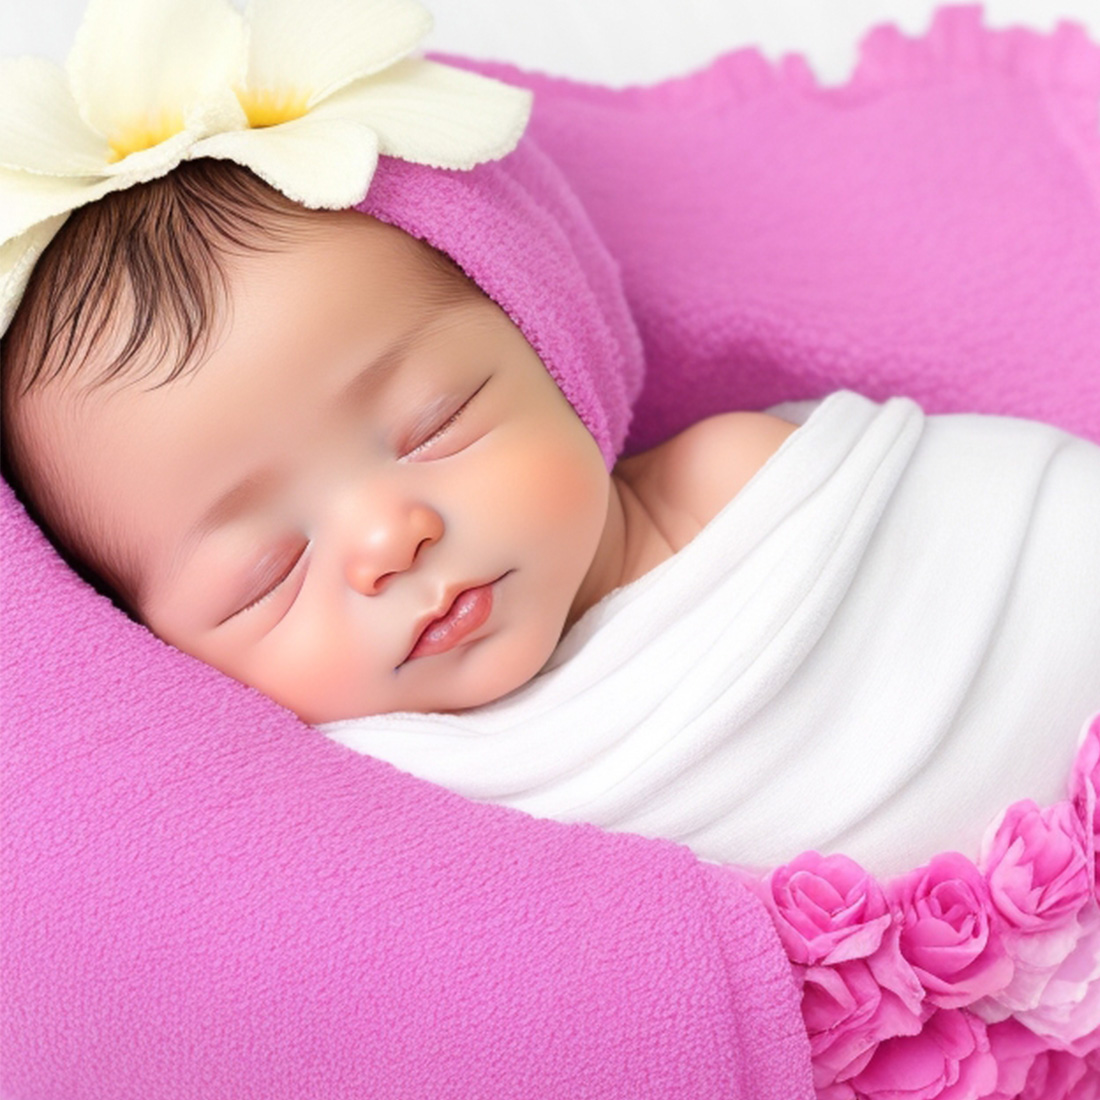 4- NEWBORN CUTE BABY POSTERS FOR NEW PARENT'S GIFTS - ONLY $11 preview image.